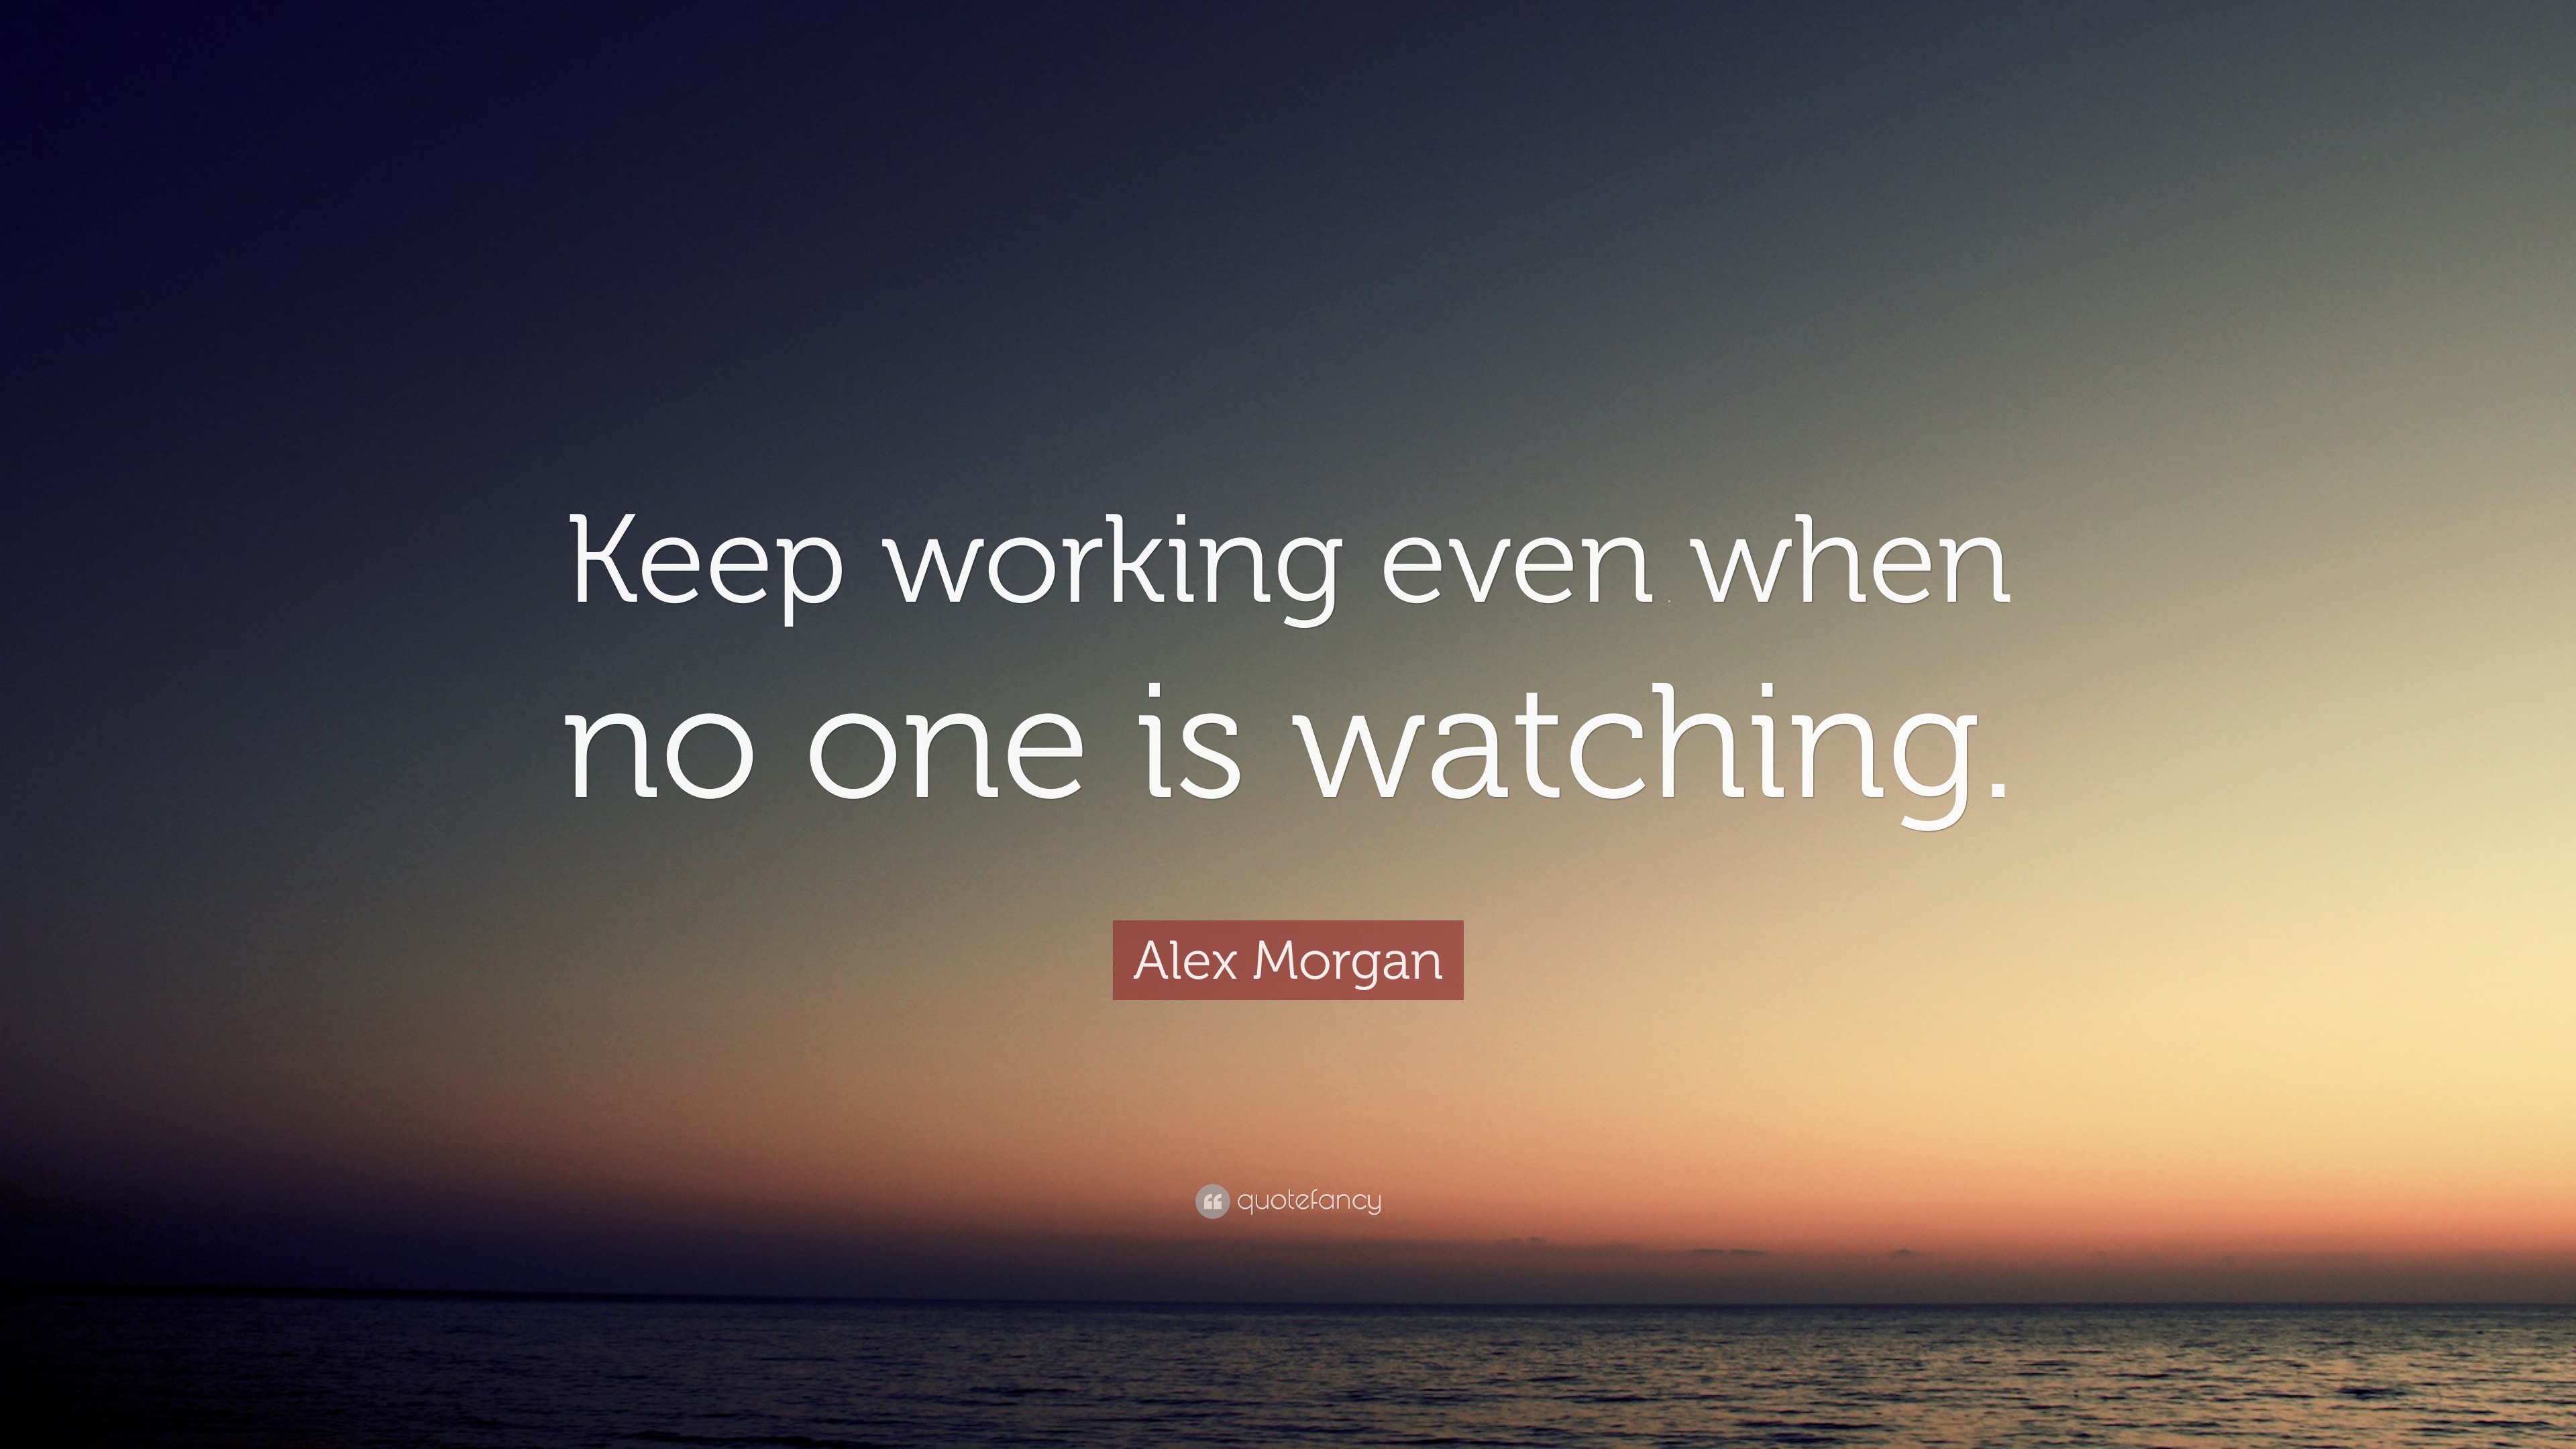 Alex Morgan Quote: “Keep working even when no one is watching.” (21